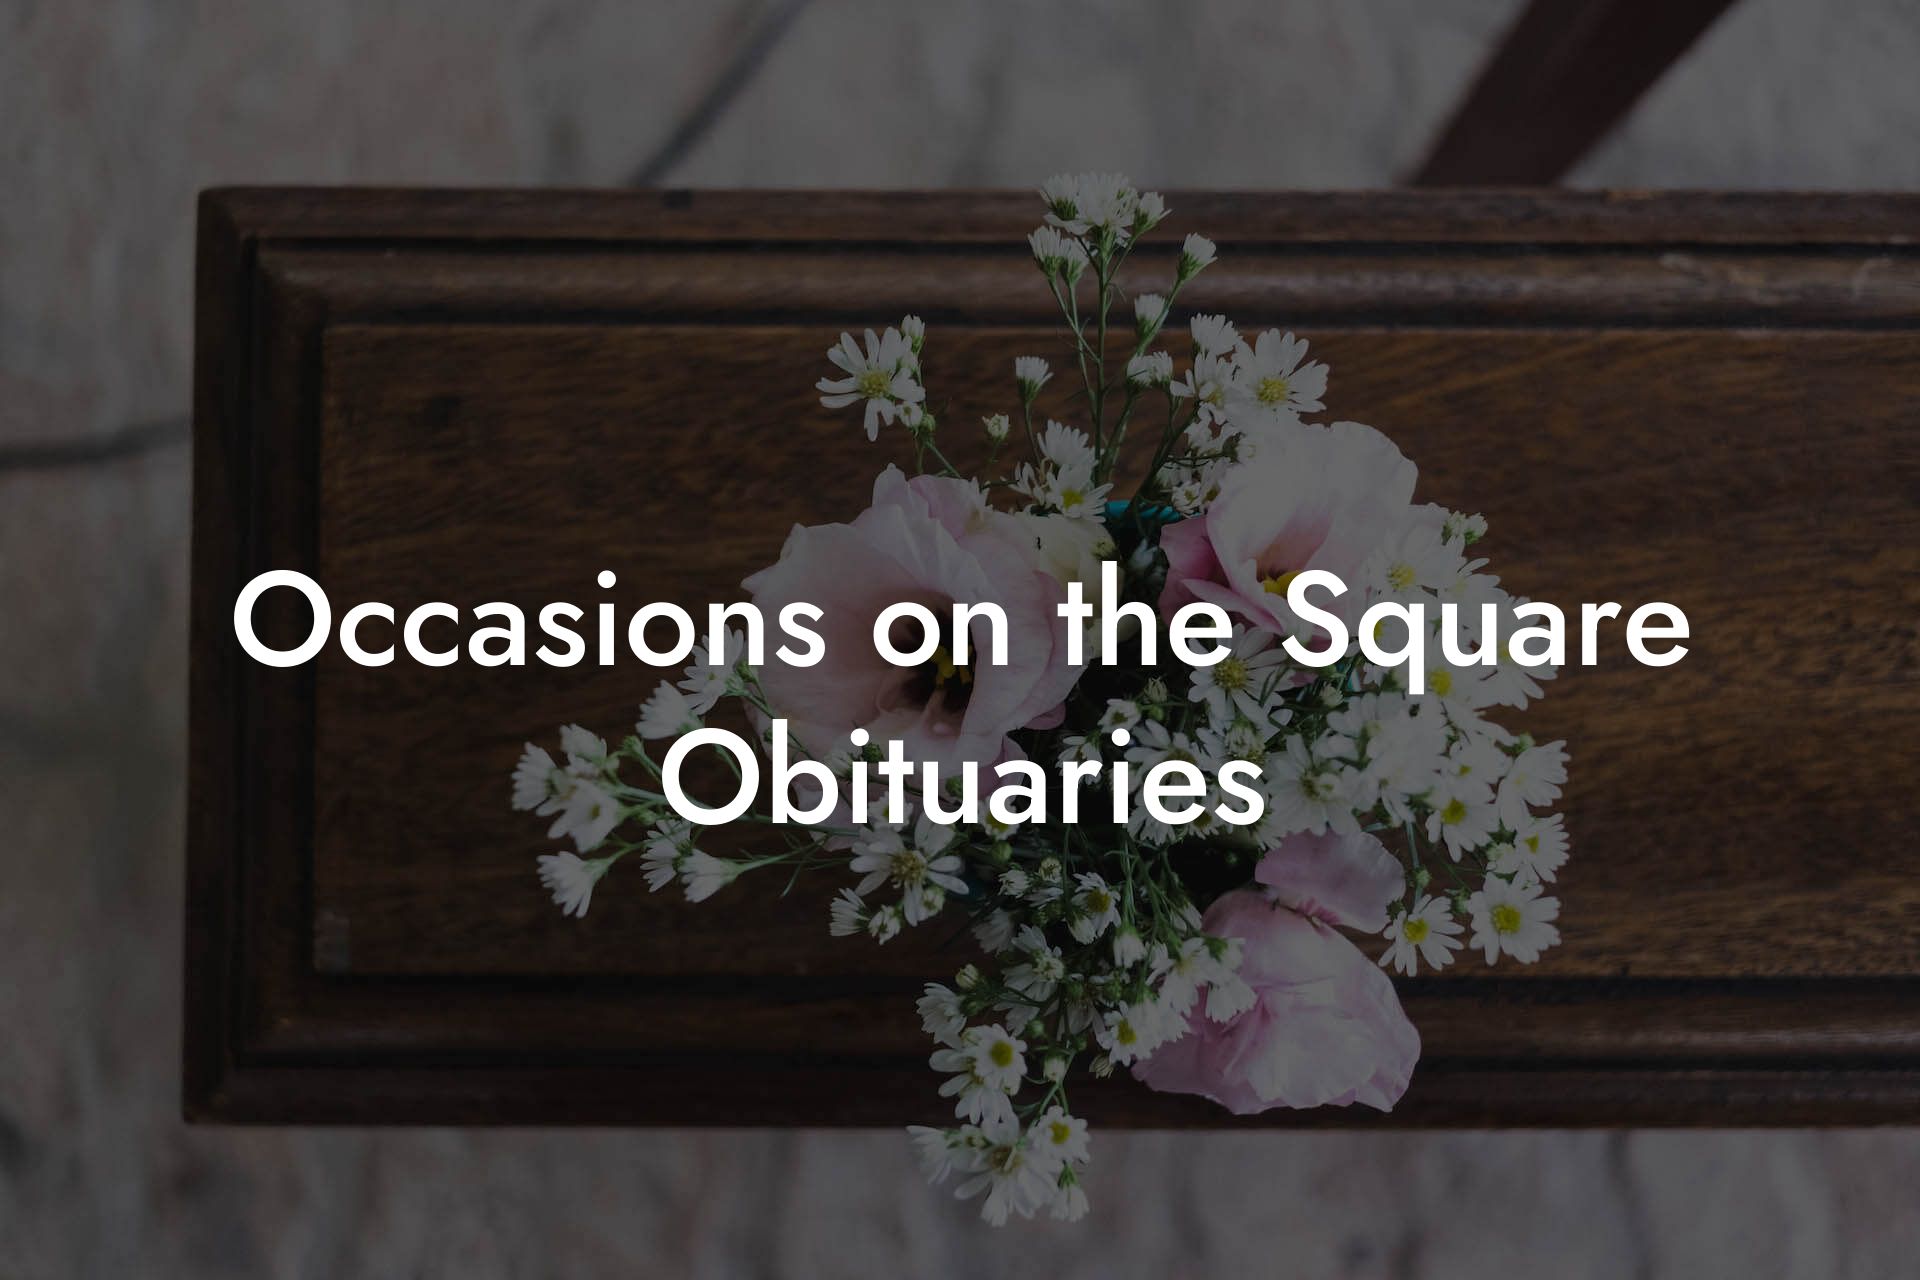 Occasions on the Square Obituaries